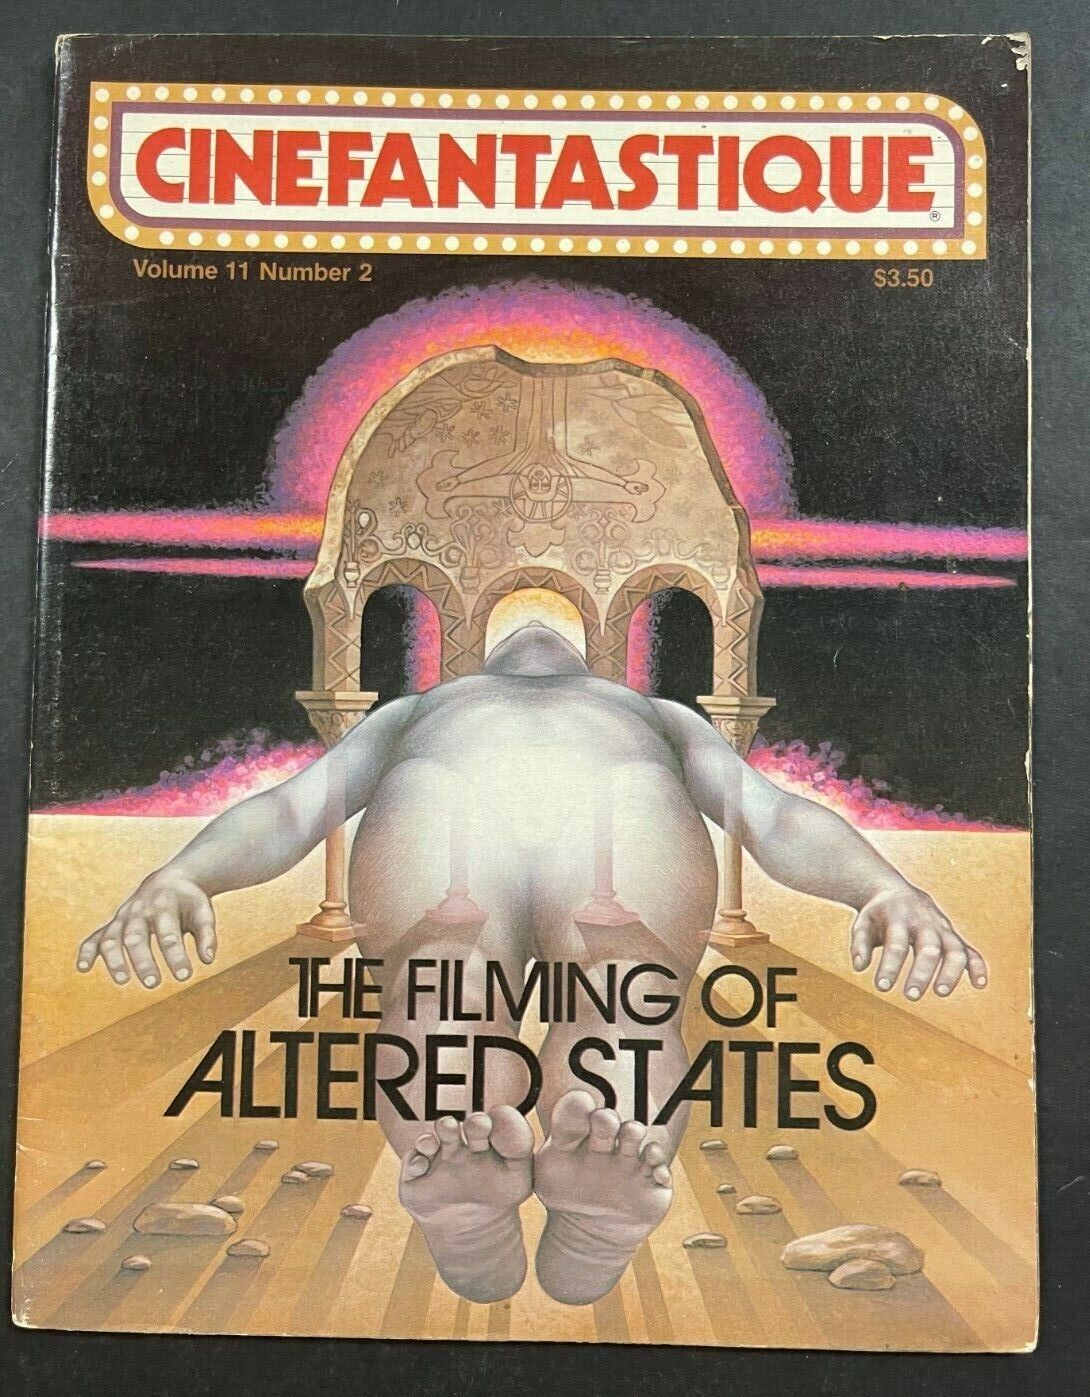 1981 FALL CINEFANTASTIQUE FILMING OF ALTERED STATES #2 FREE S&H (AM) 92421